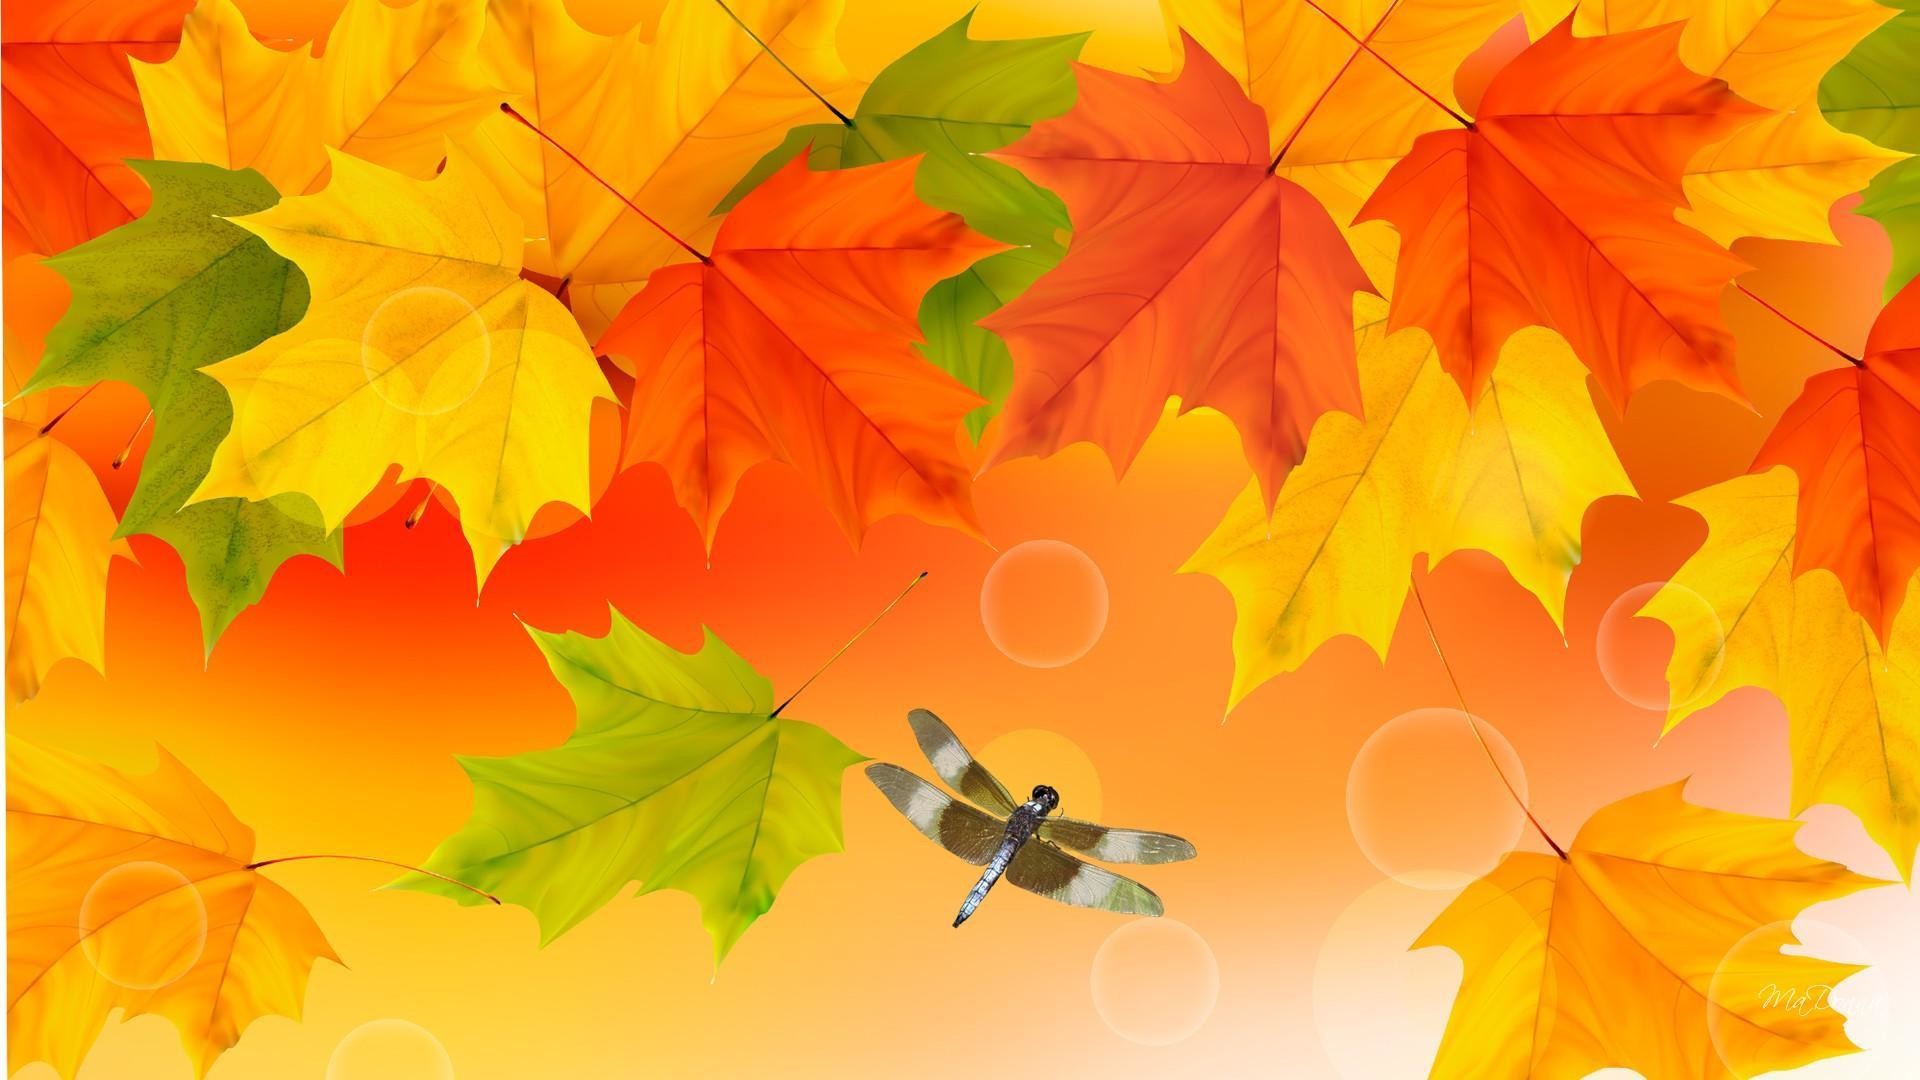 1920x1080 Widescreen Wallpapers of Fall Color, Creative Backgrounds